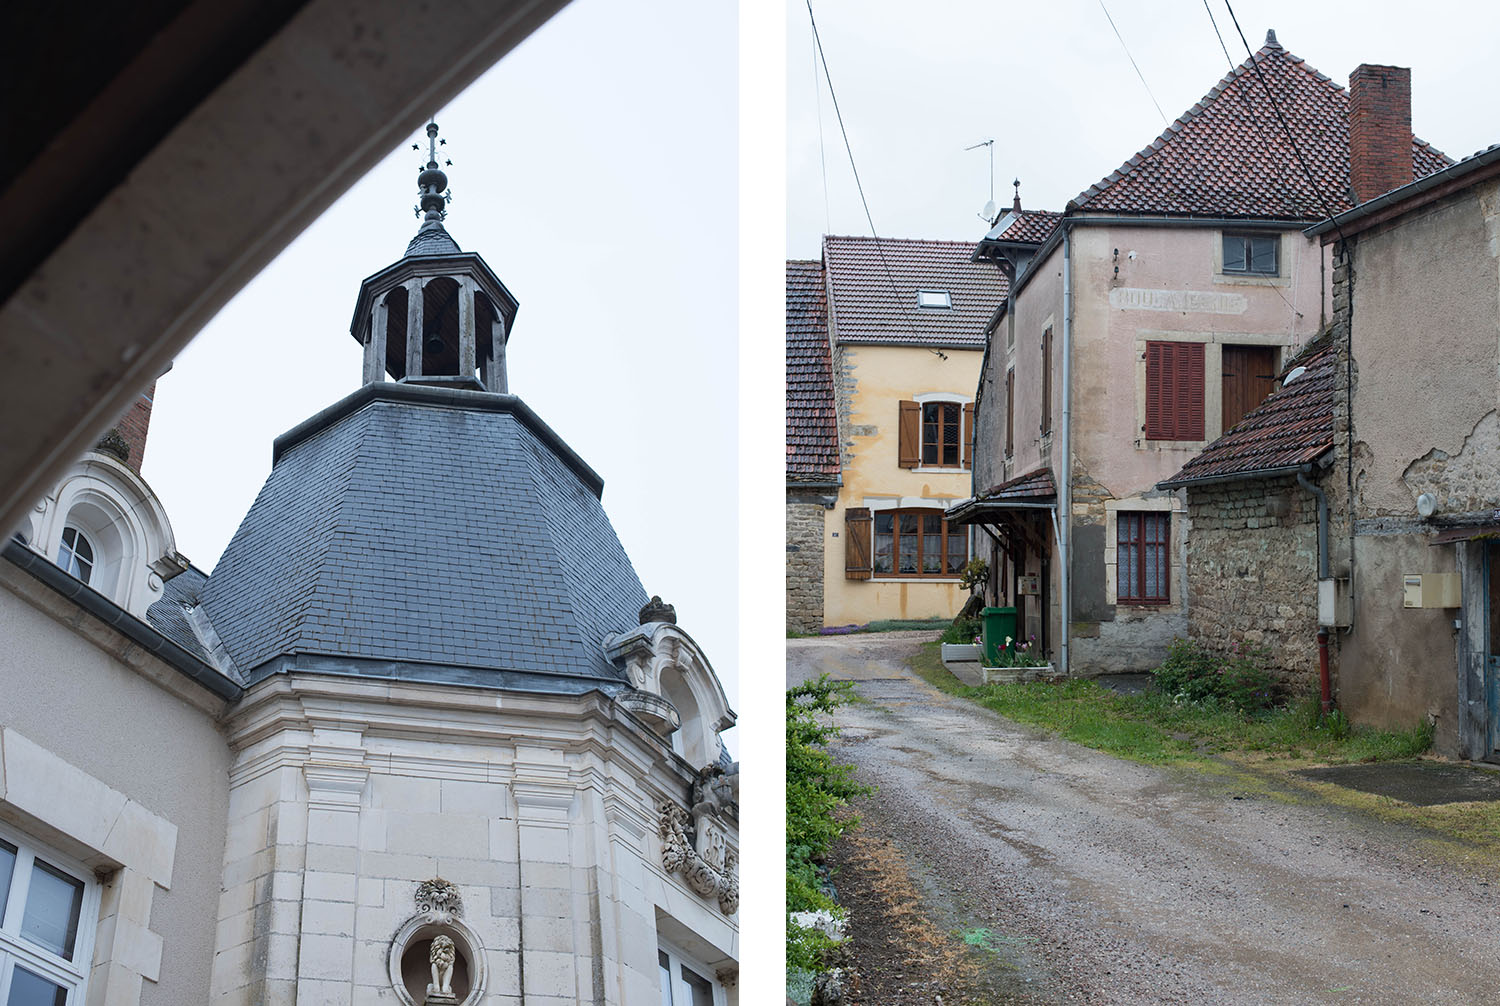 Travel blogger Cee Fardoe of Coco & Vera shows contrast between the Chateau Sainte-Sabine and the town of the same name